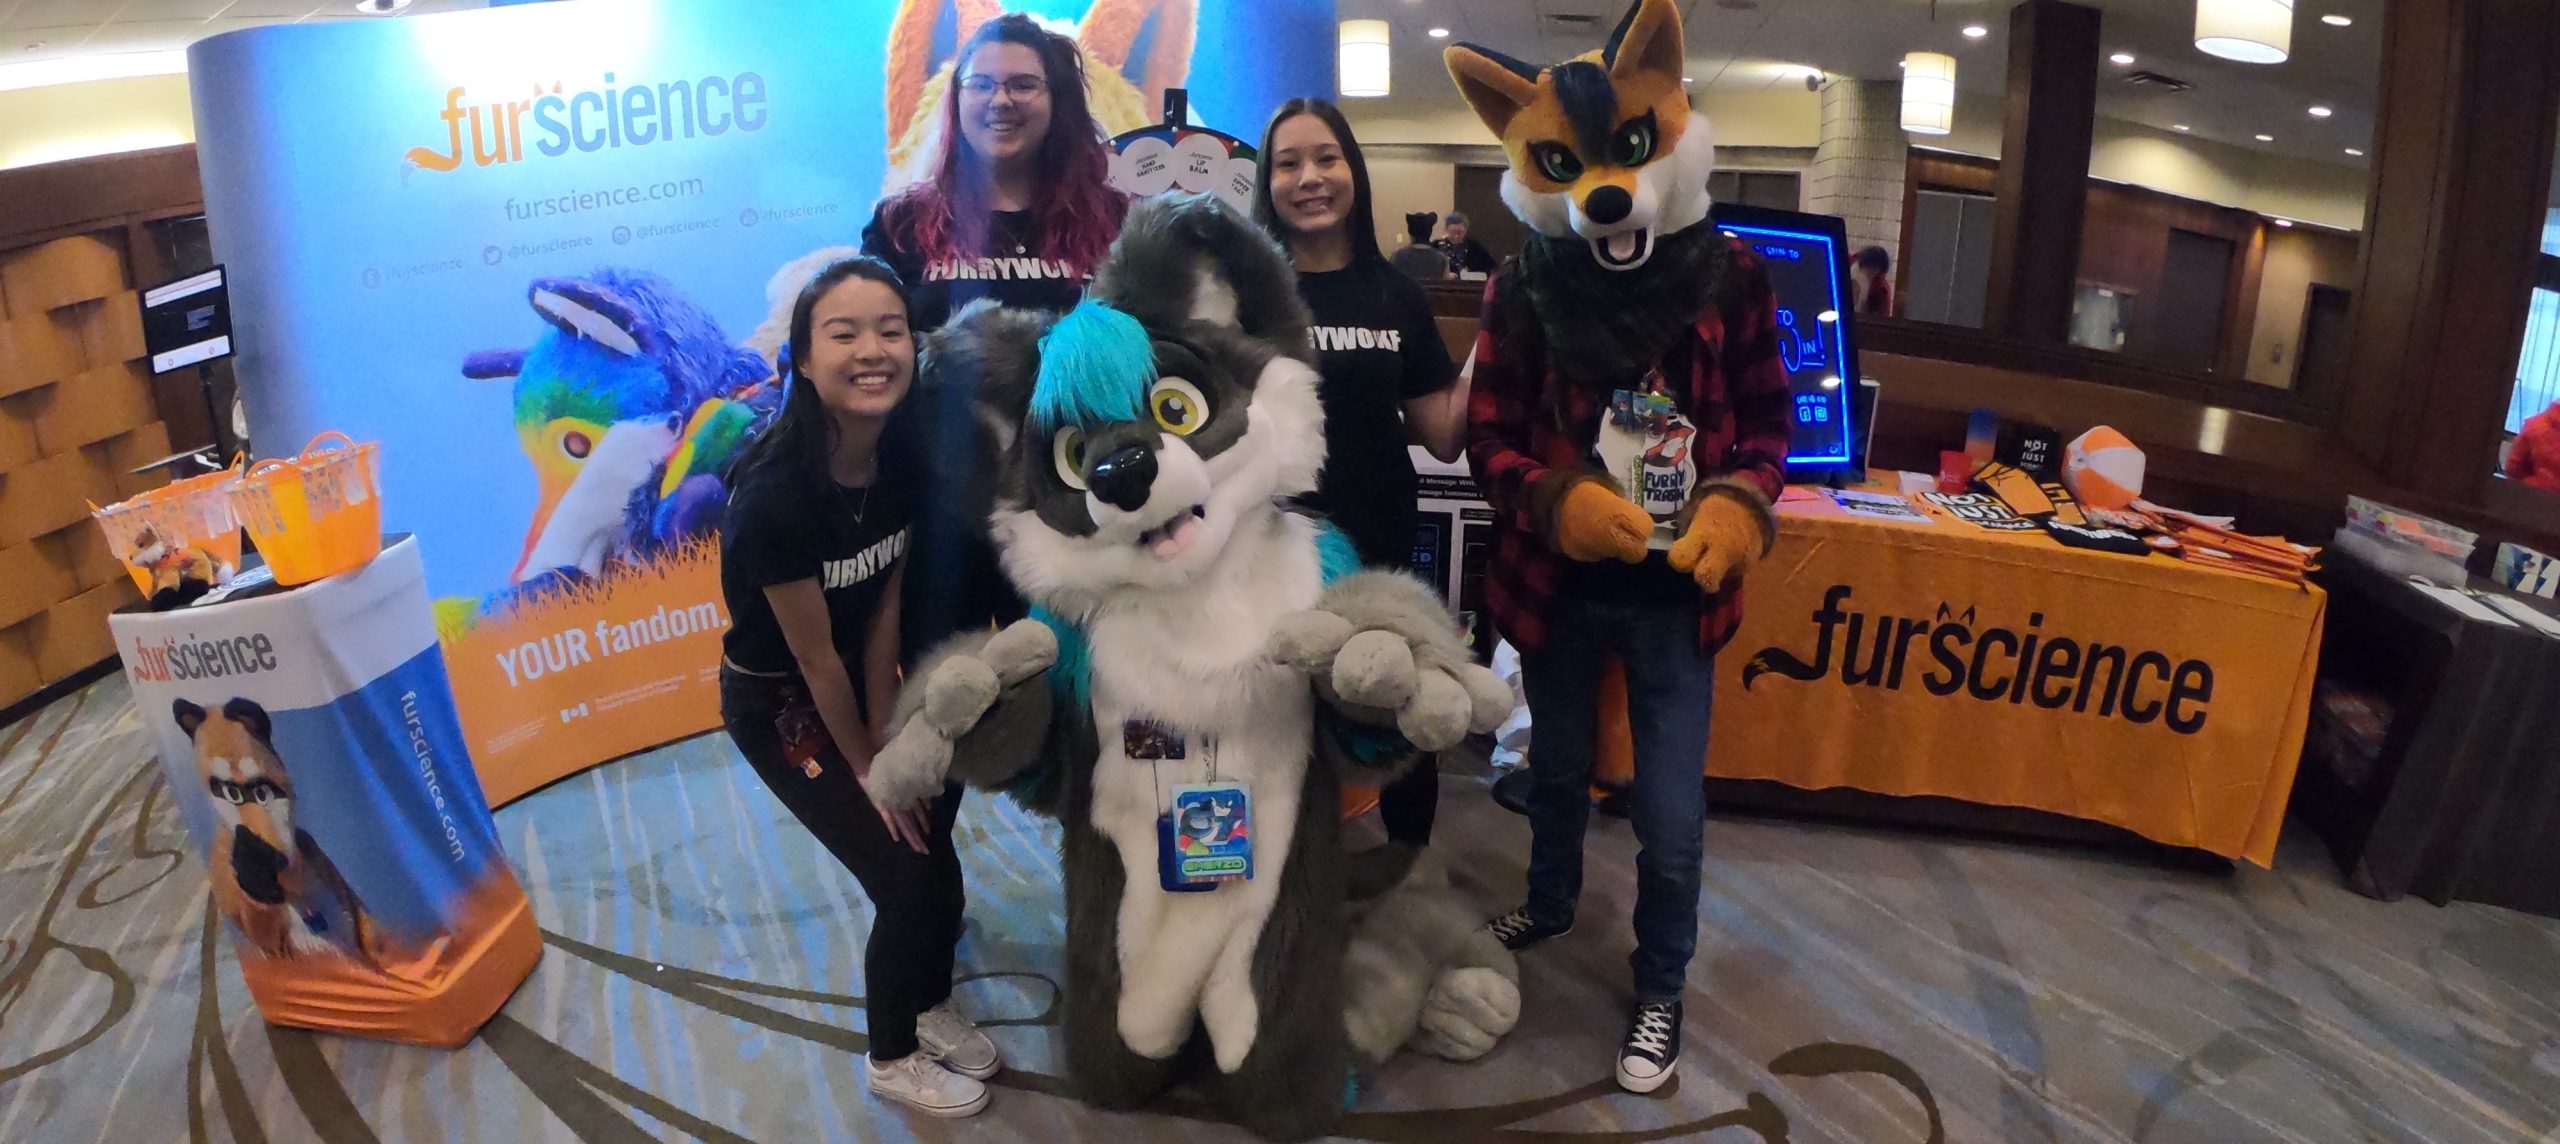 Furscience Research Assistants pose in front of the Furscience Booth with furry attendees in fursuits at Furnal Equinox, a furry convention in Toronto, Ontario, Canada